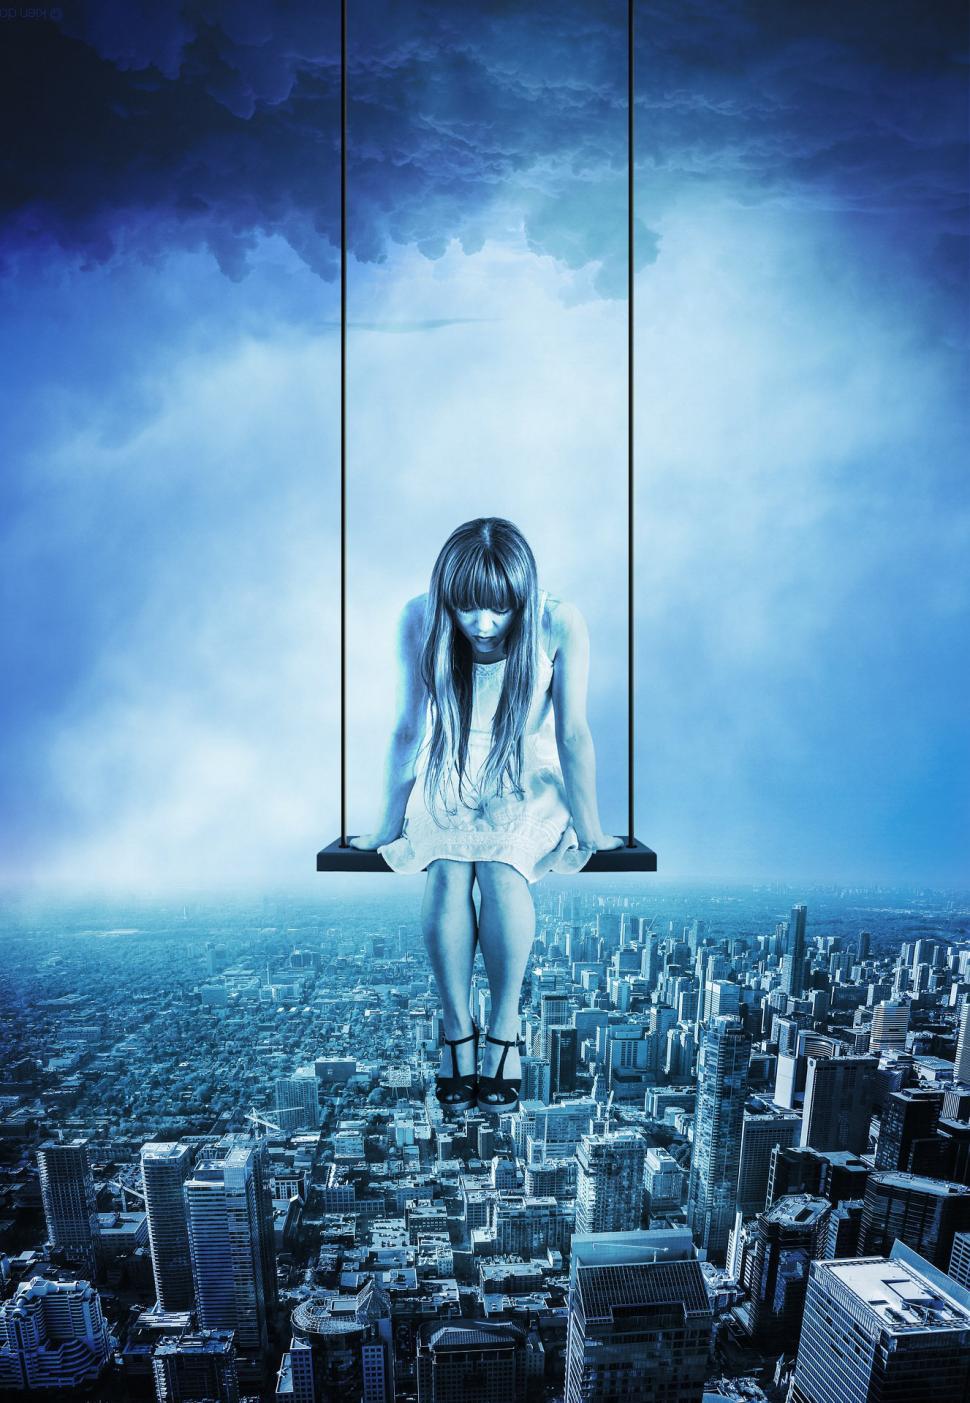 Free Image of Woman Sitting on Swing in City 